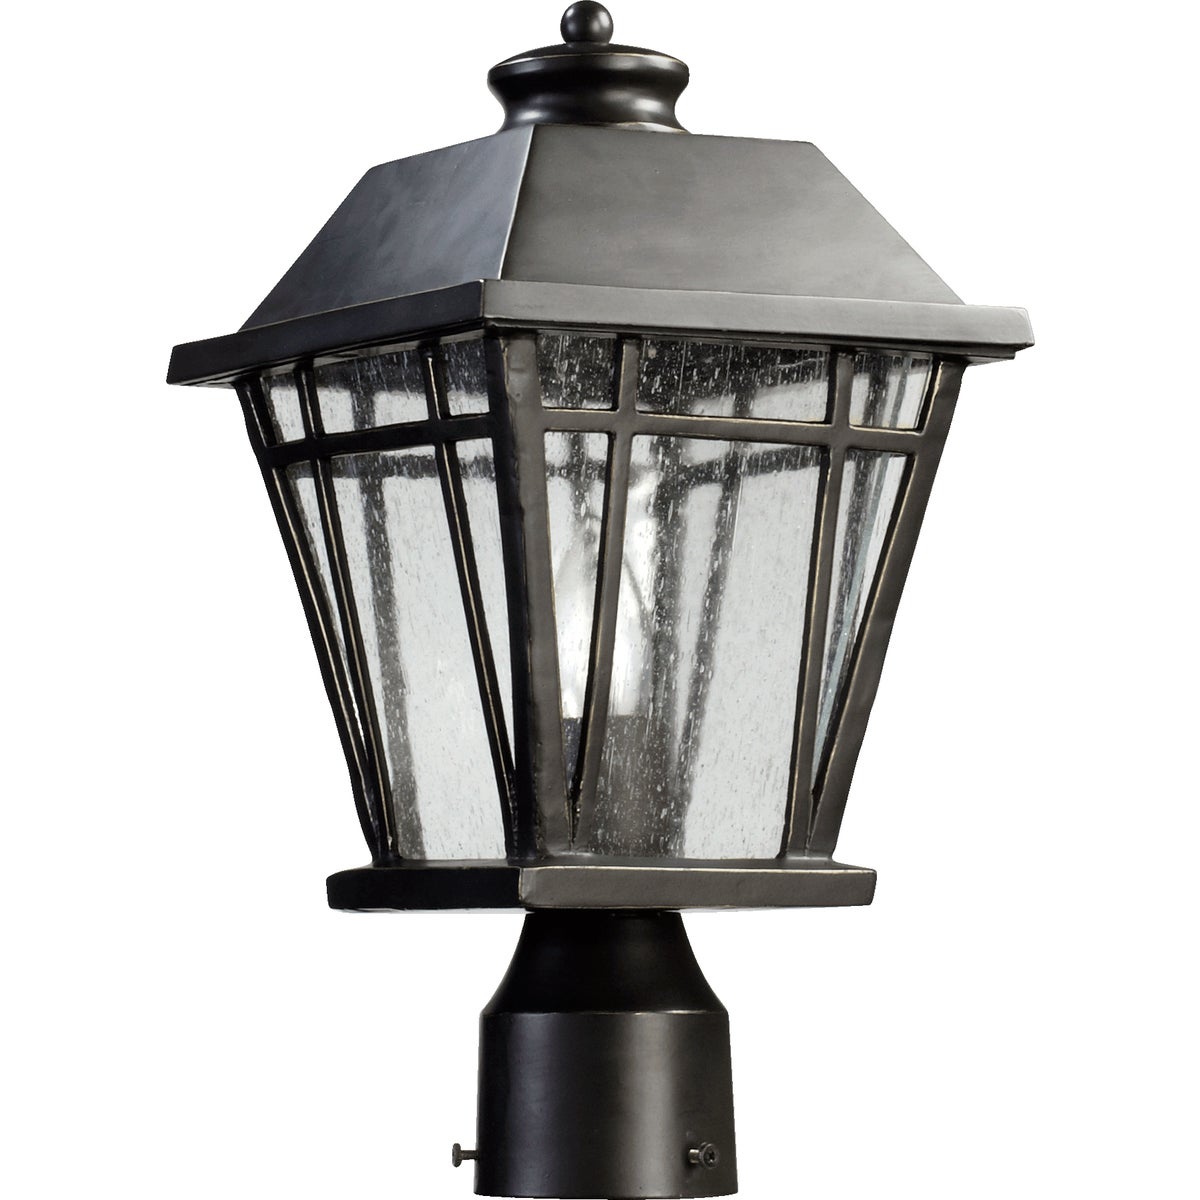 Traditional Outdoor Post Light with clear glass panes and a vintage frame. Adds rustic charm to your outdoor space. Old World finish and decorative curve complete the timeless design. Perfect for wet locations. 8&quot;W x 15&quot;H. 100W. UL Listed. 2-year warranty.